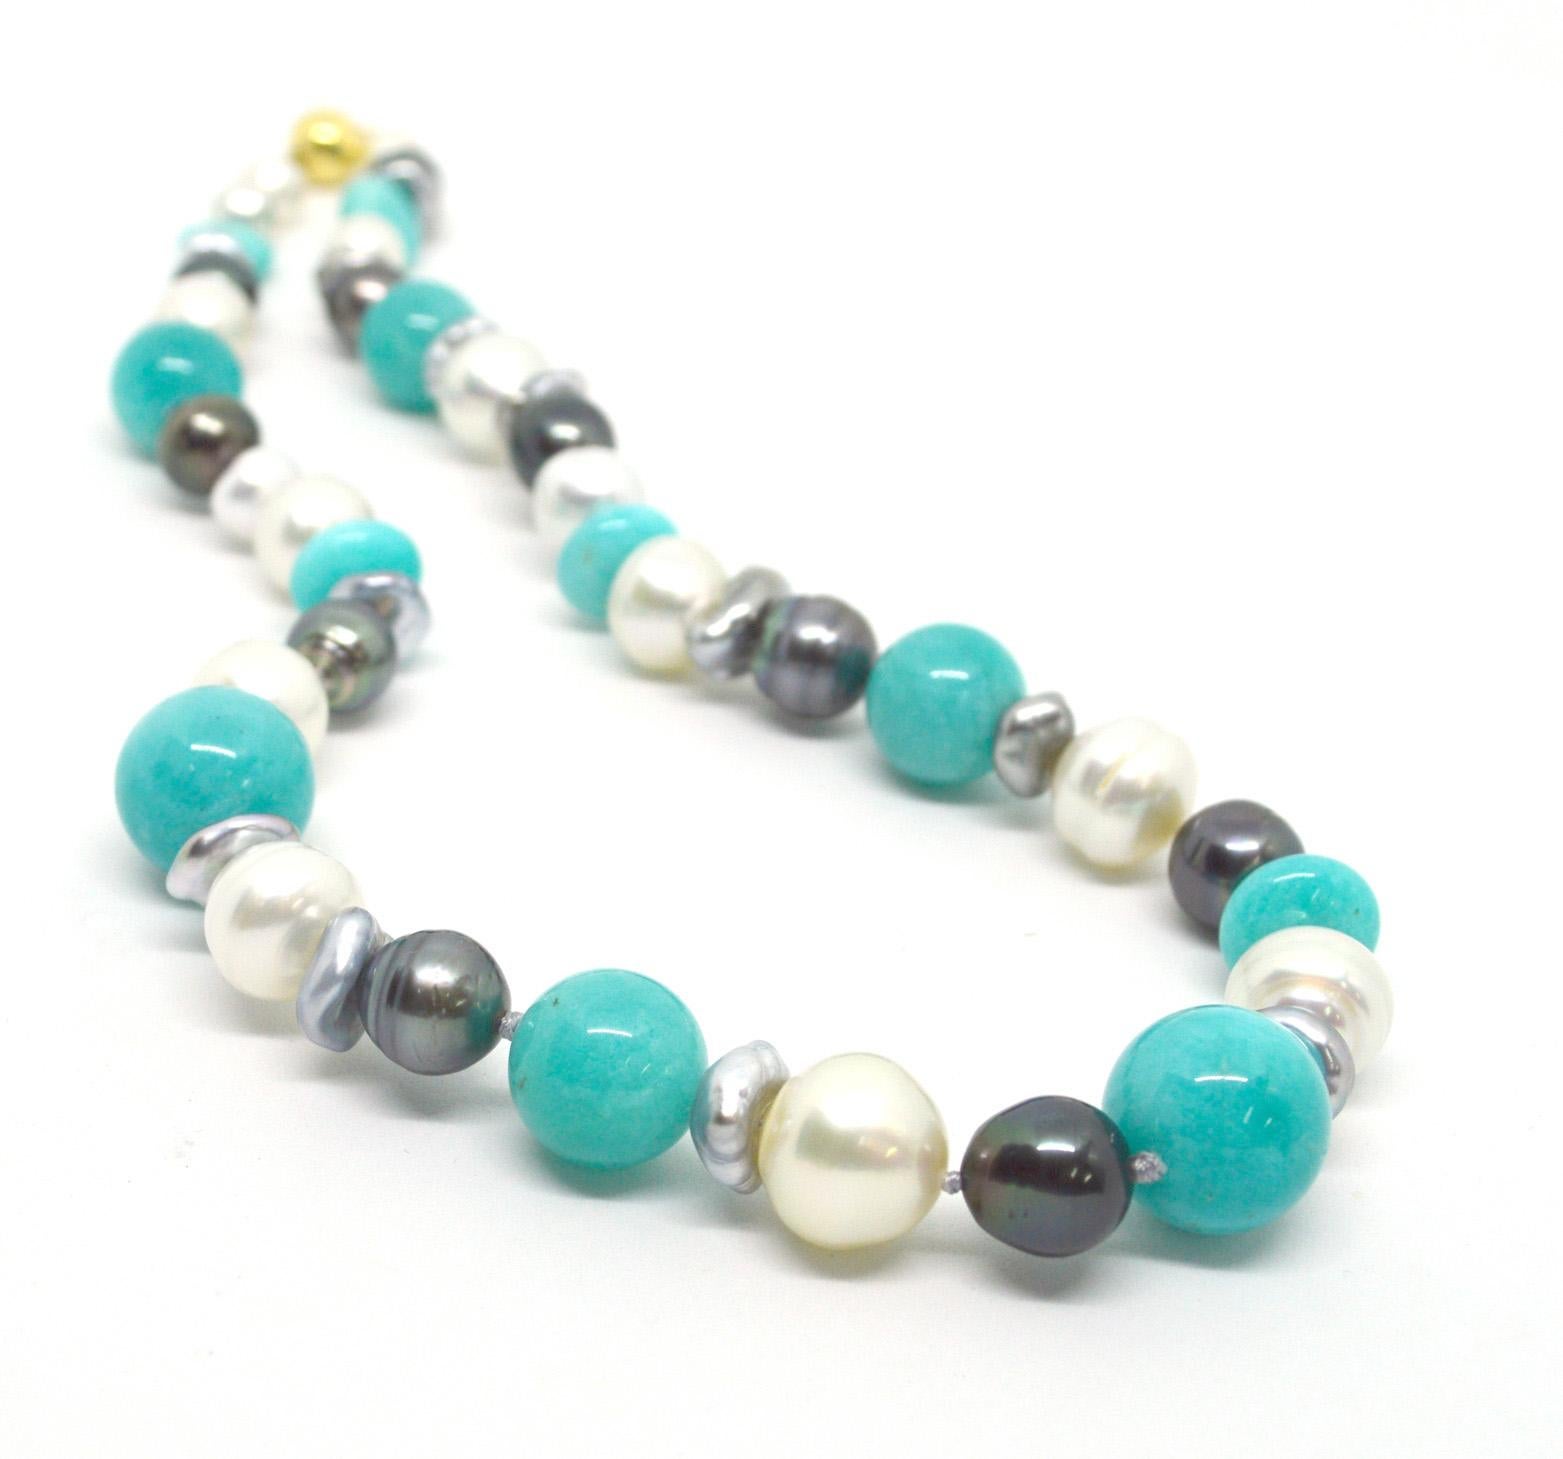 Adorn your neck in luxury with the soft tones of Peruvian Amazonite with creams whites and greys Pearls. A mix of baroque Australian South Sea and Tahitian Pearls ranging from 9mm to 13.7mm.
Necklace 50cm in length. Hand knotted on soft grey